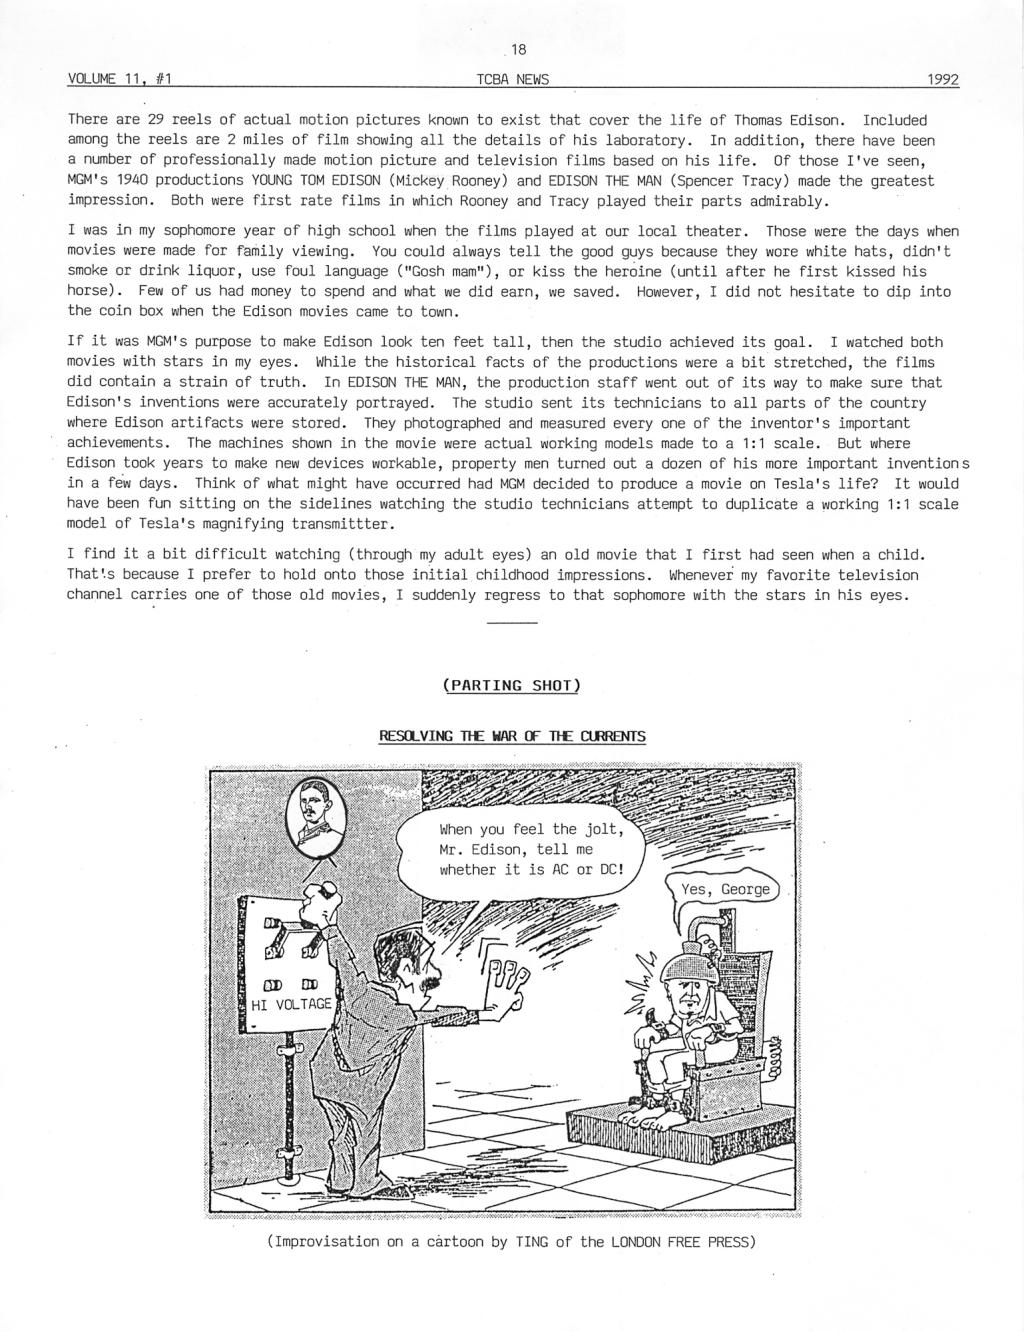 TCBA Volume 11 - Issue 1 - Page 18 of 18